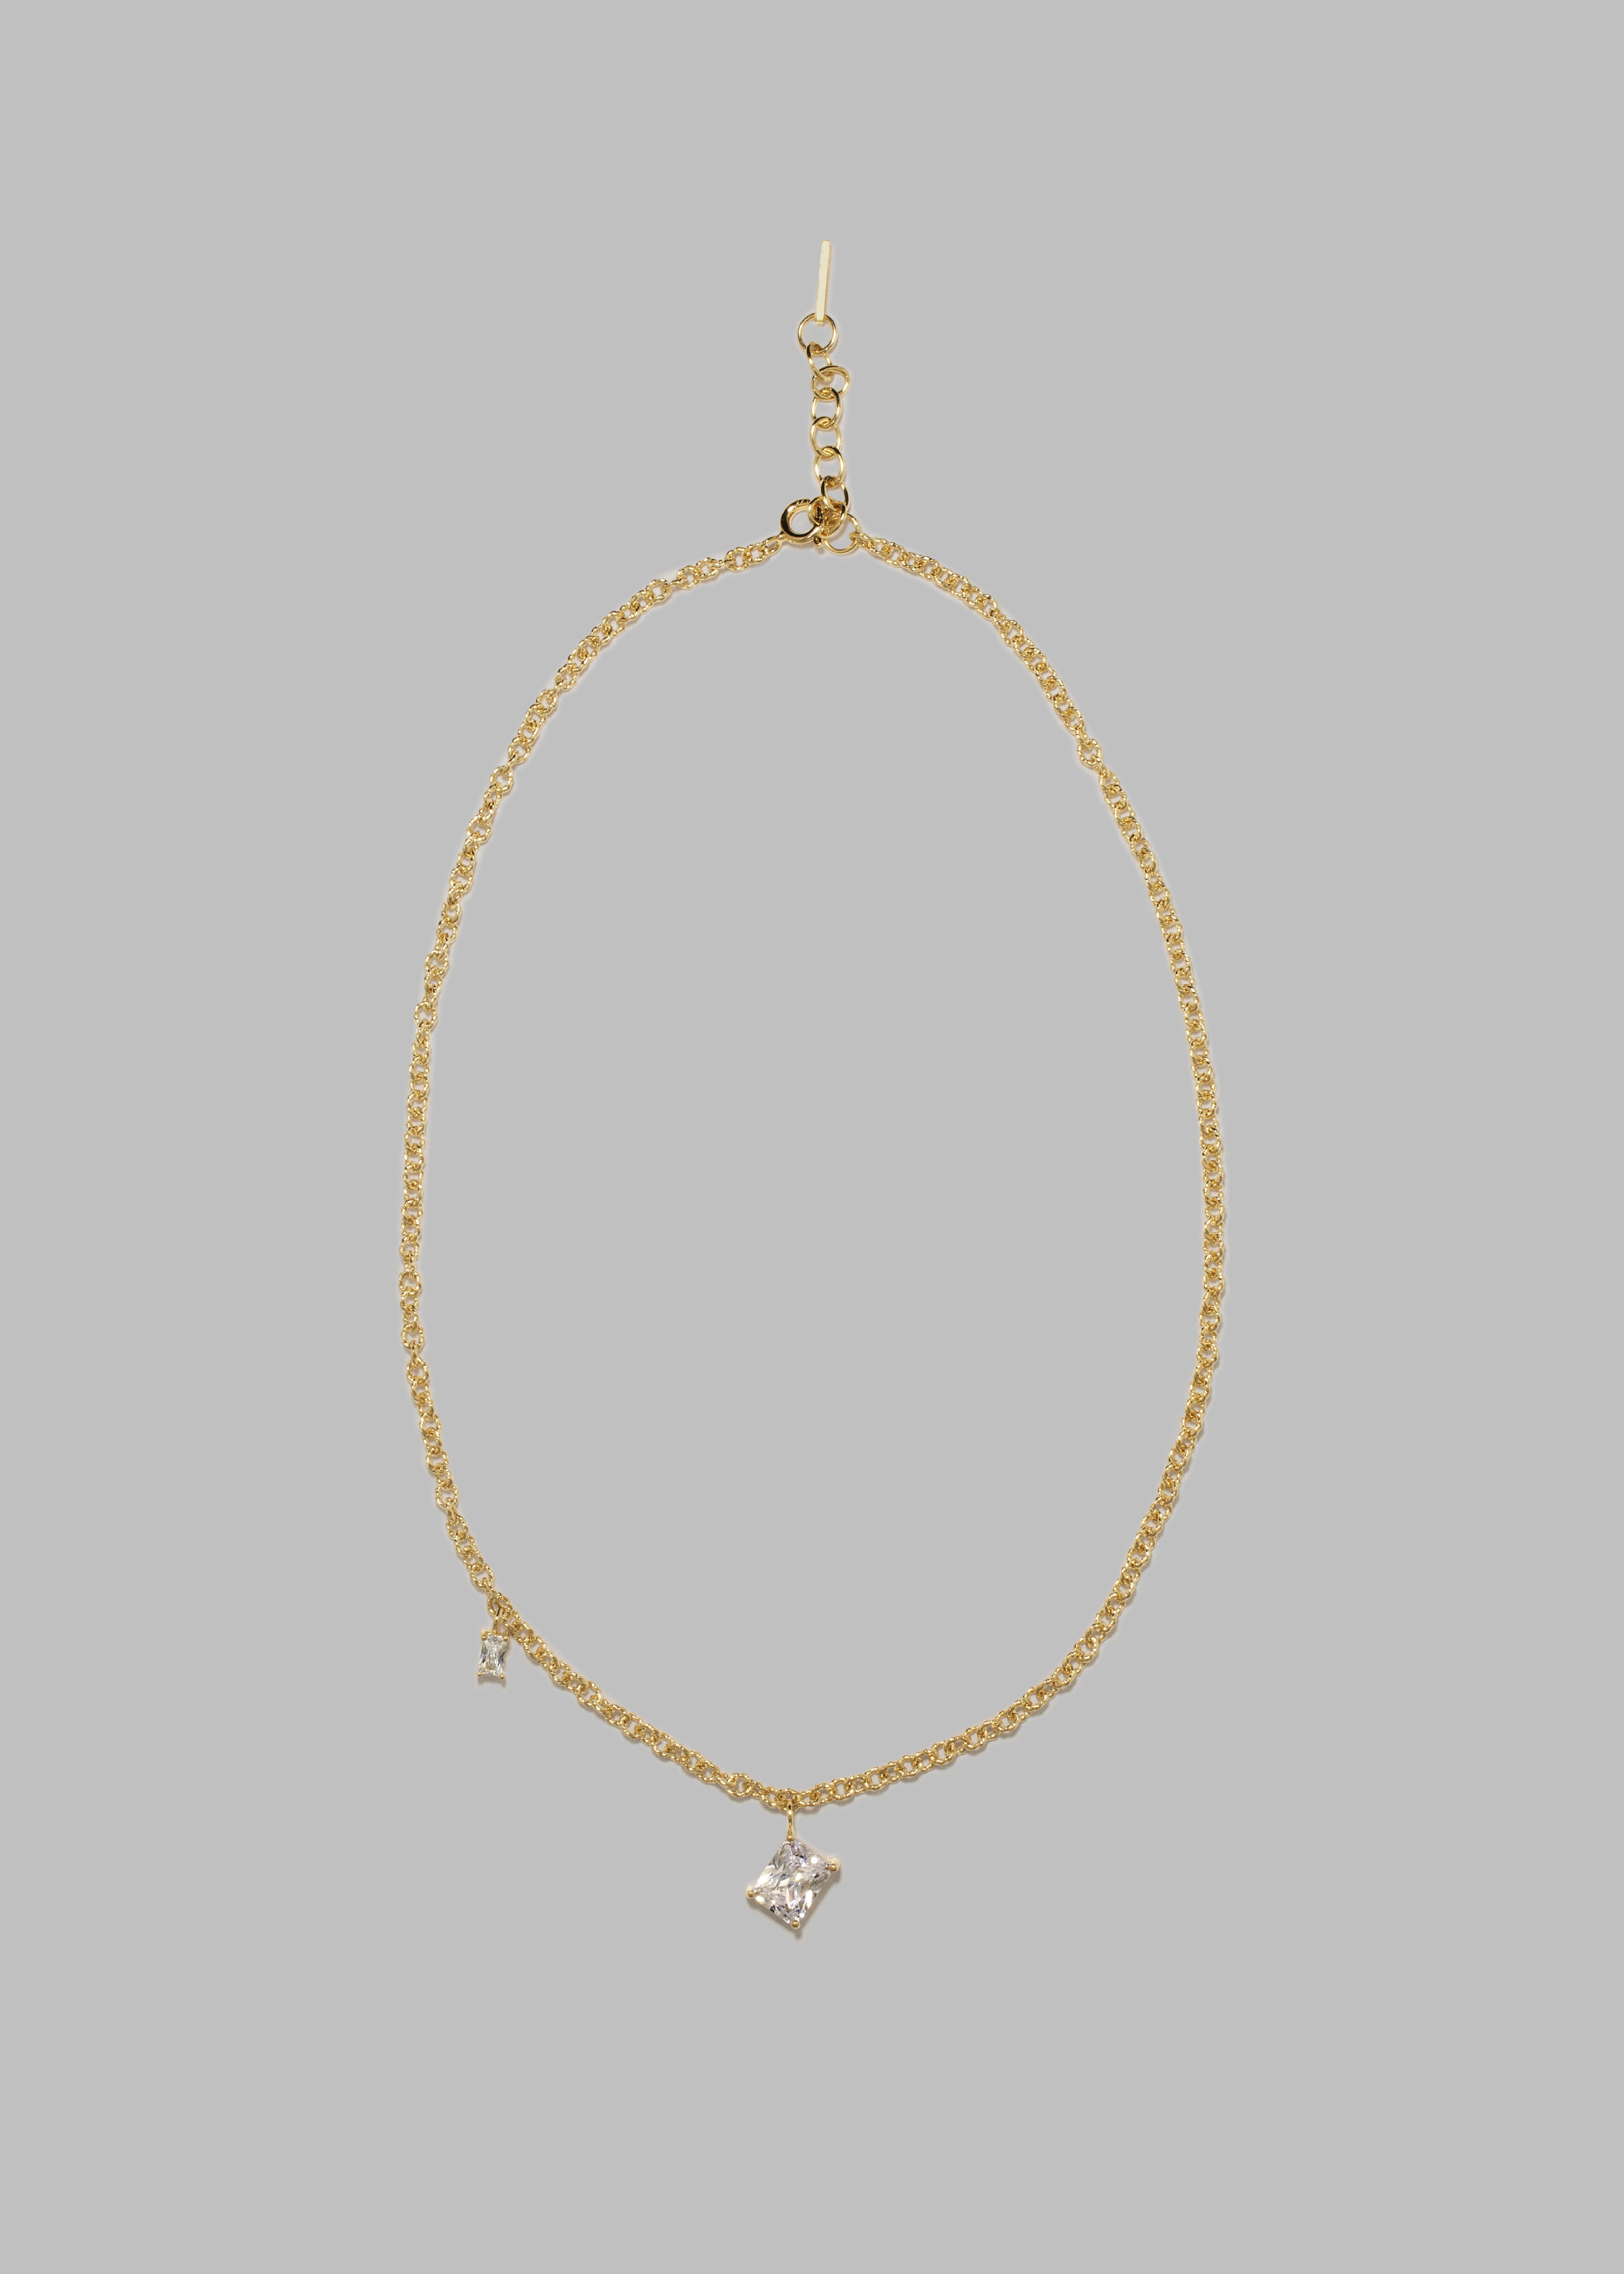 Completedworks Encrypted Dreams Necklace - Cubic Zirconia/Gold Vermeil - 2